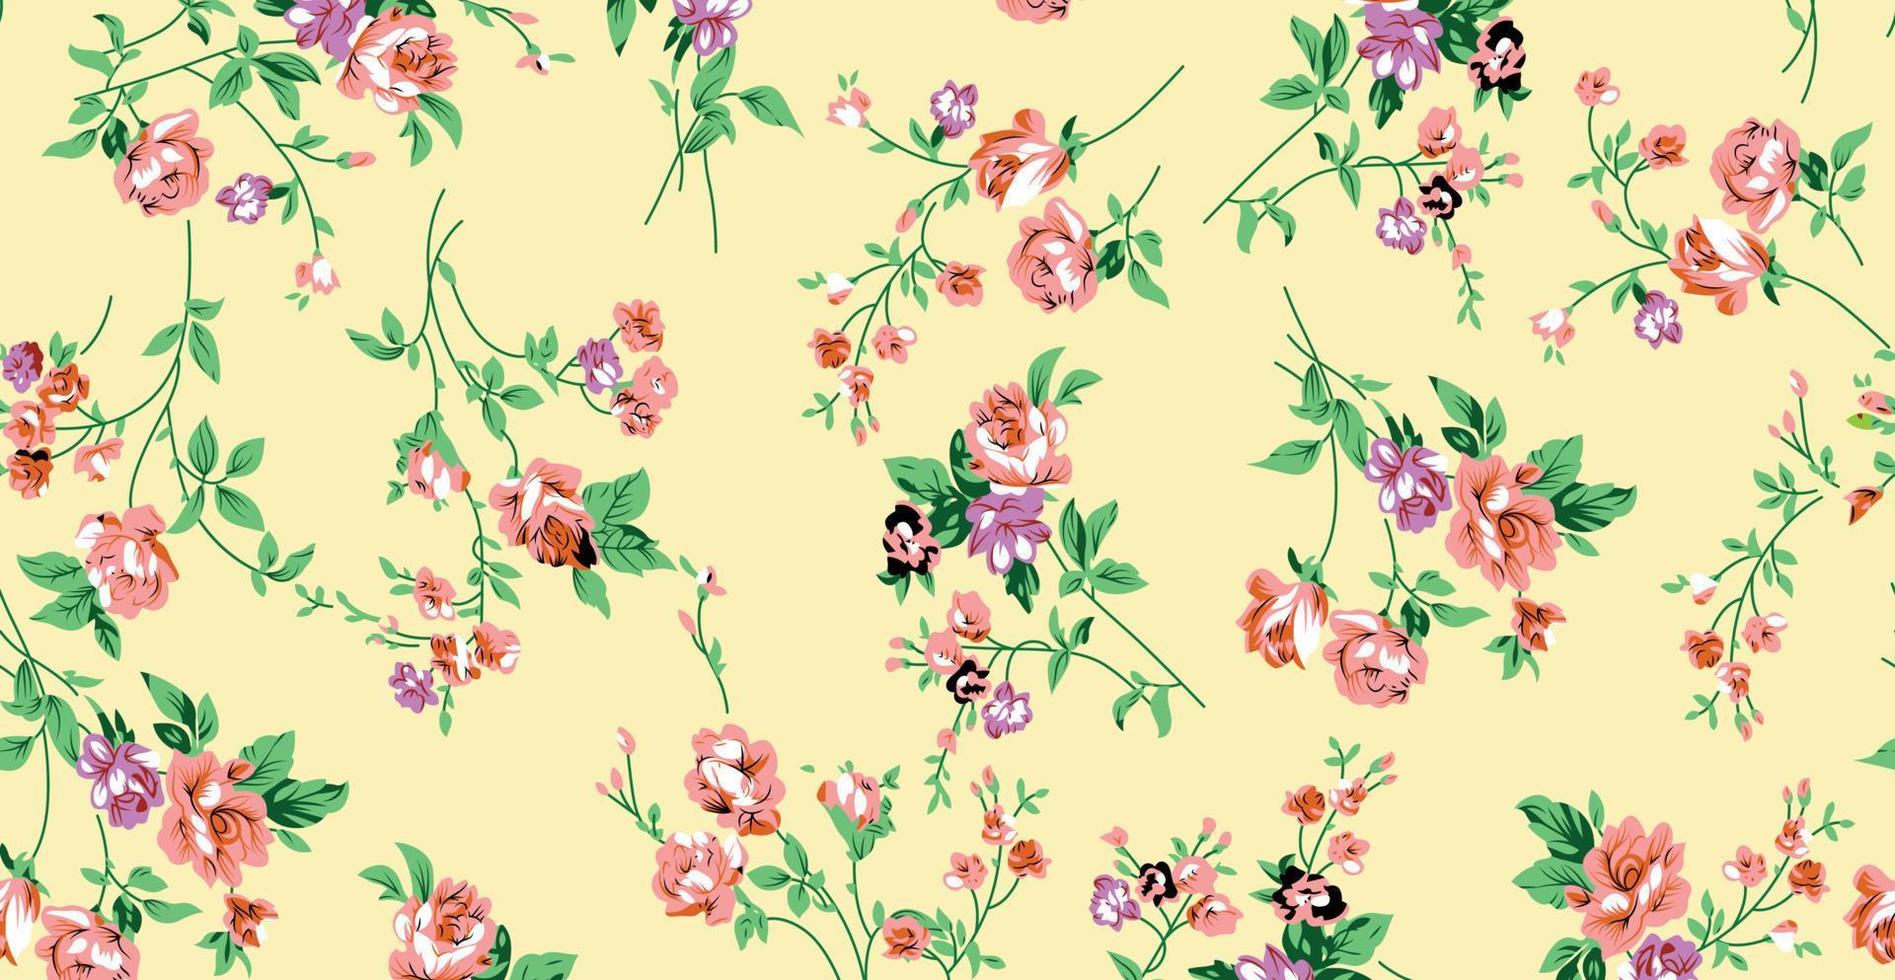 Seamless Floral Pattern in vector.Vector seamless pattern collection.Wild flowers, leaves, branches, candies repeat pattern design set.seamless floral pattern.Handmade. Wallpaper, fabric or design of vector